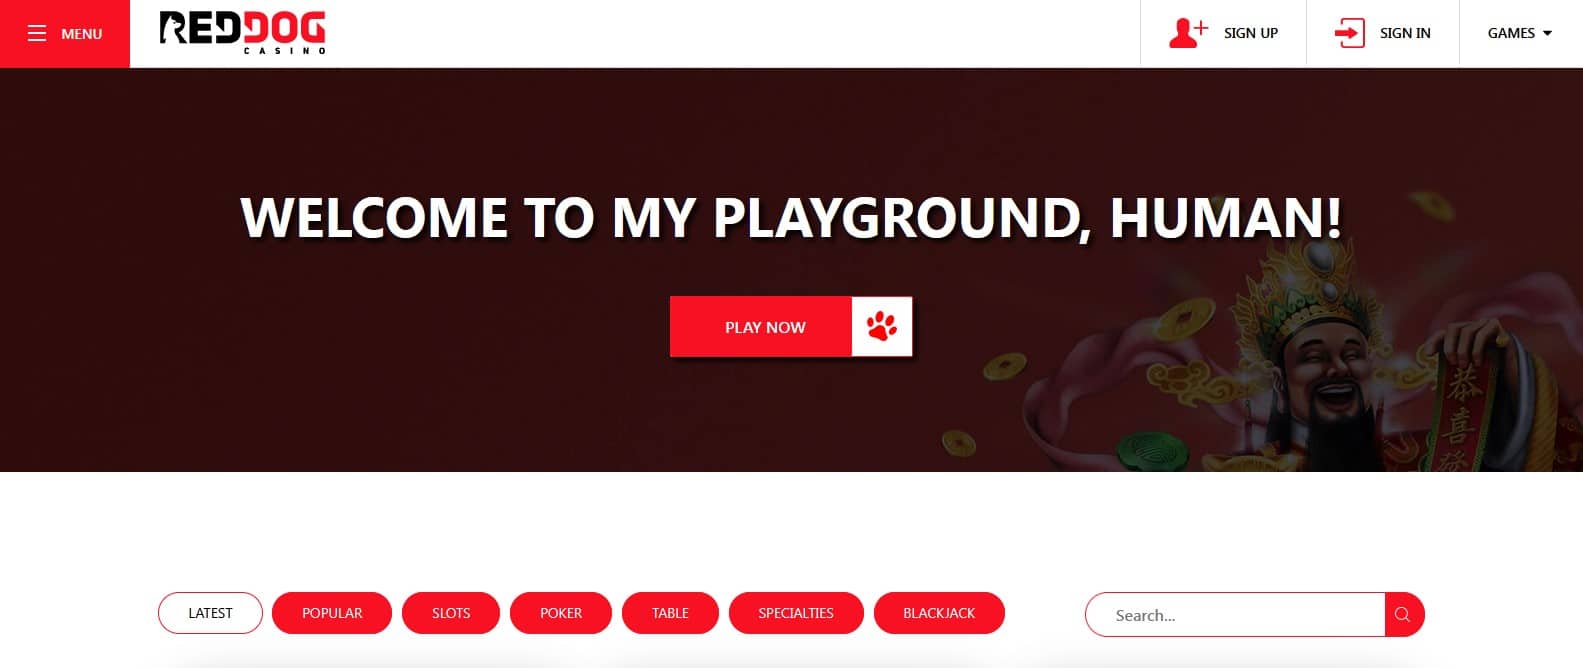 Red Dog Casino Games and Online Pokies